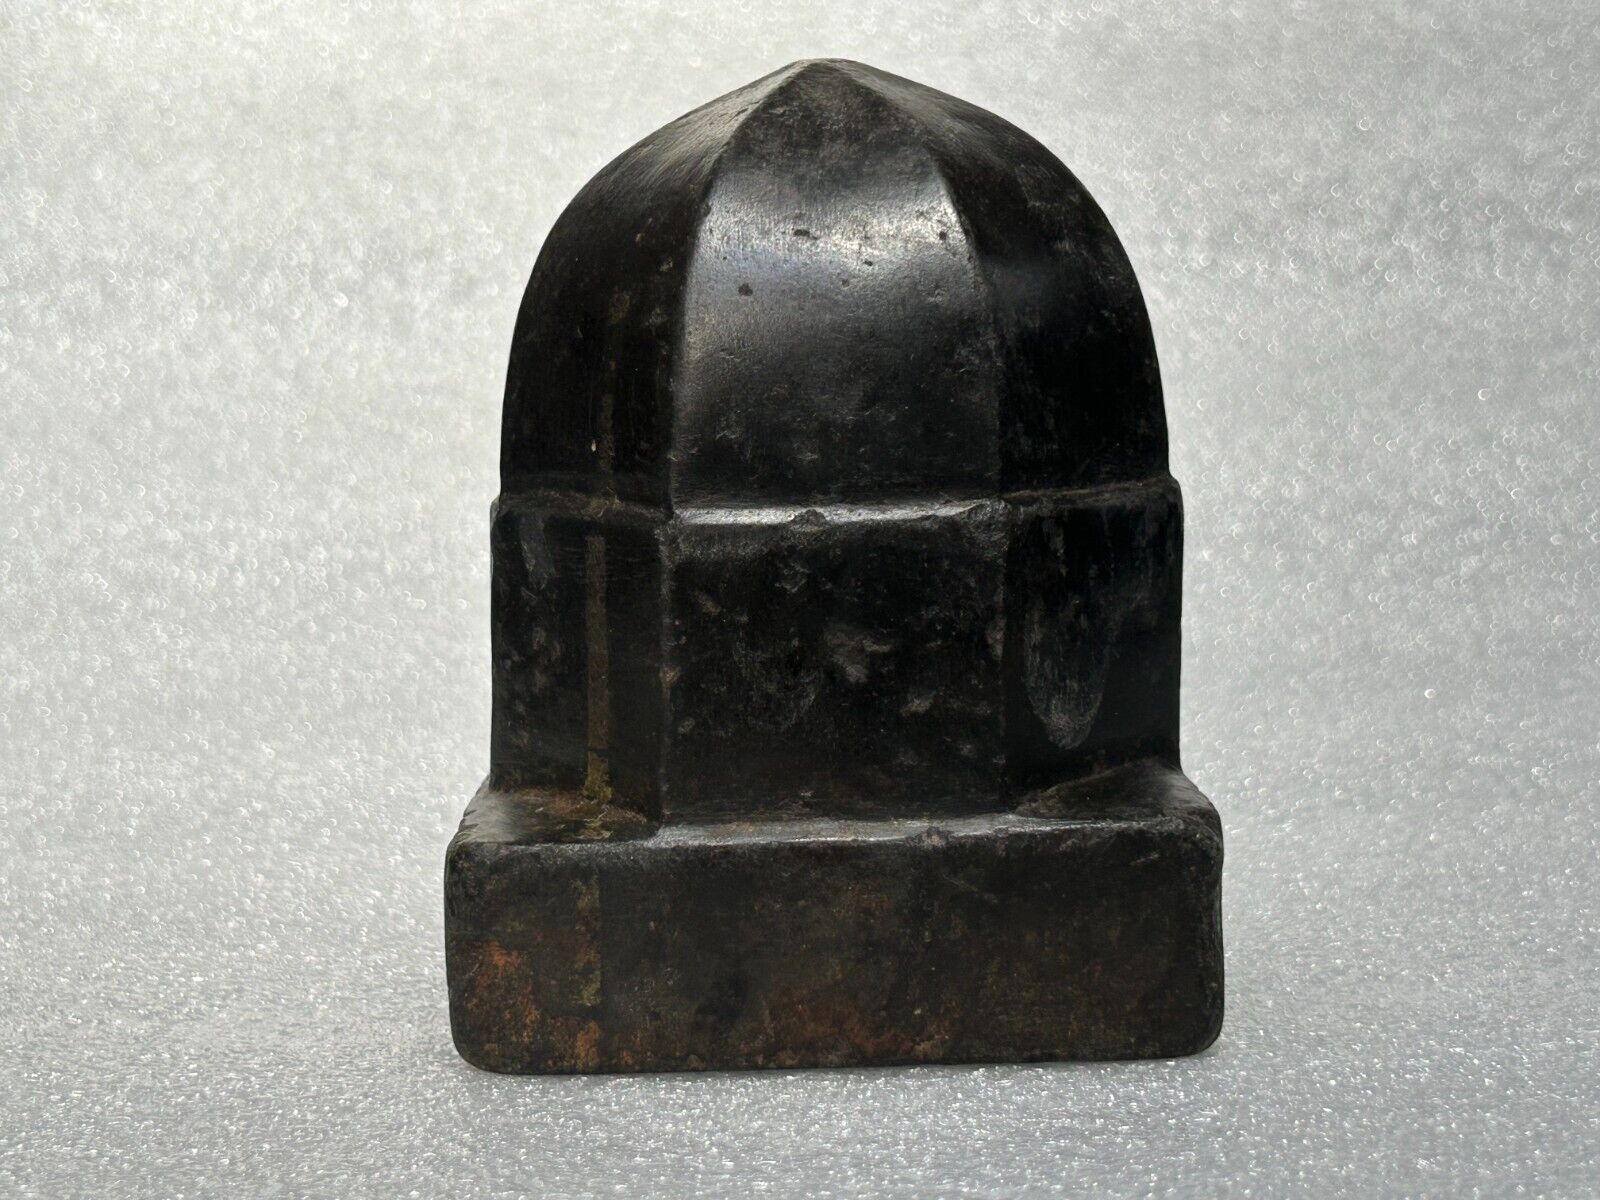 19c OLD ANCIENT HAND CARVED BLACK STONE MOSQUE DOM FINIAL MINAR BOOK/DOOR STOPER